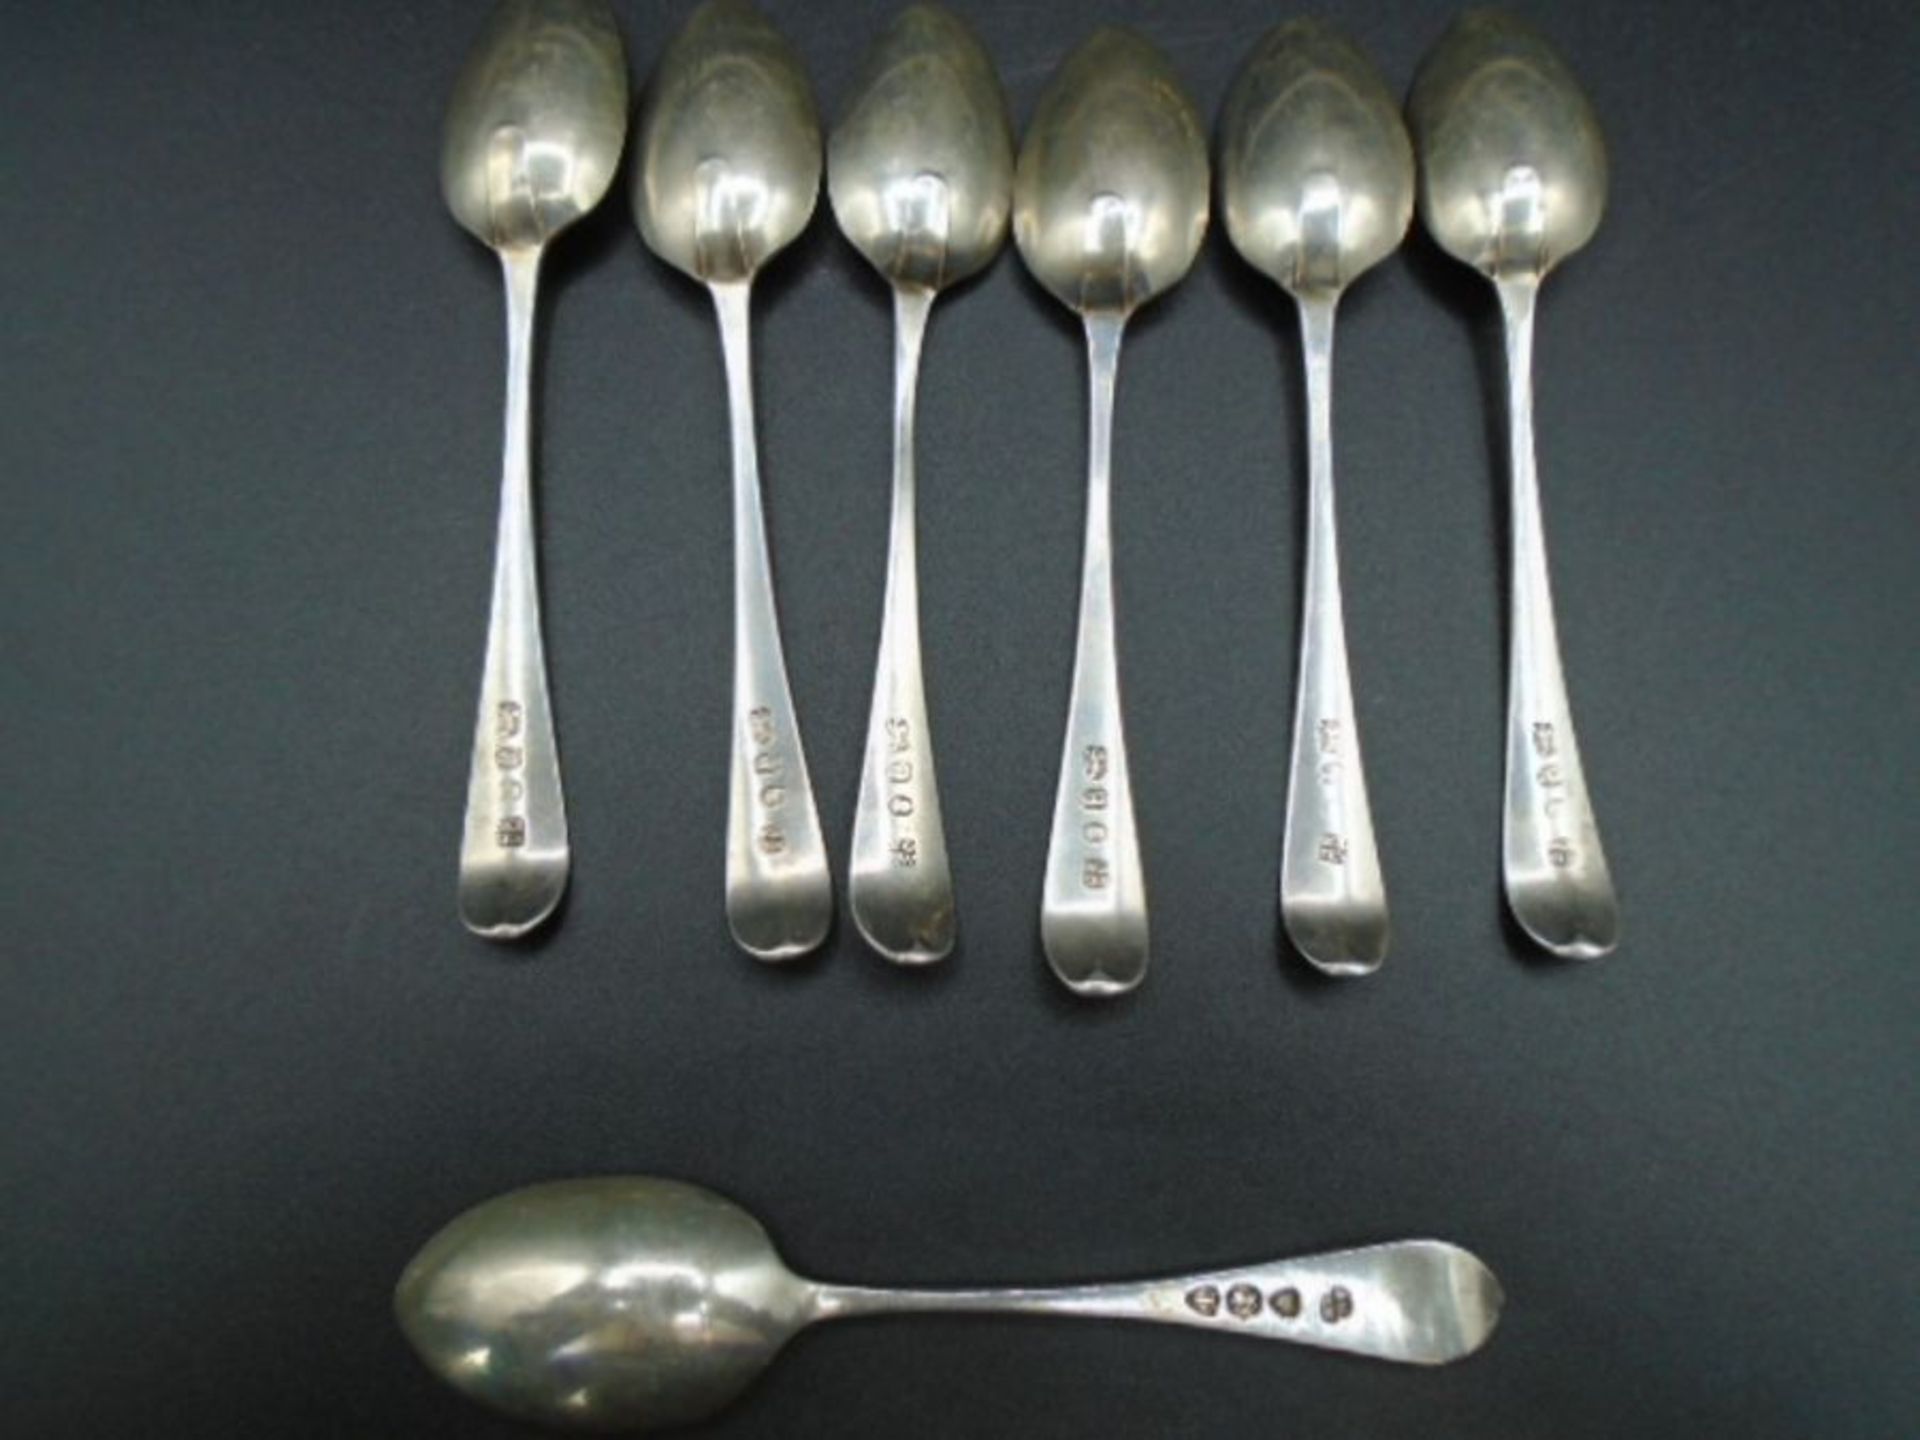 Six George IV Silver hallmarked sppons (1817 by Samuel Goobehere & Edward Wigan) in a case not - Image 3 of 5